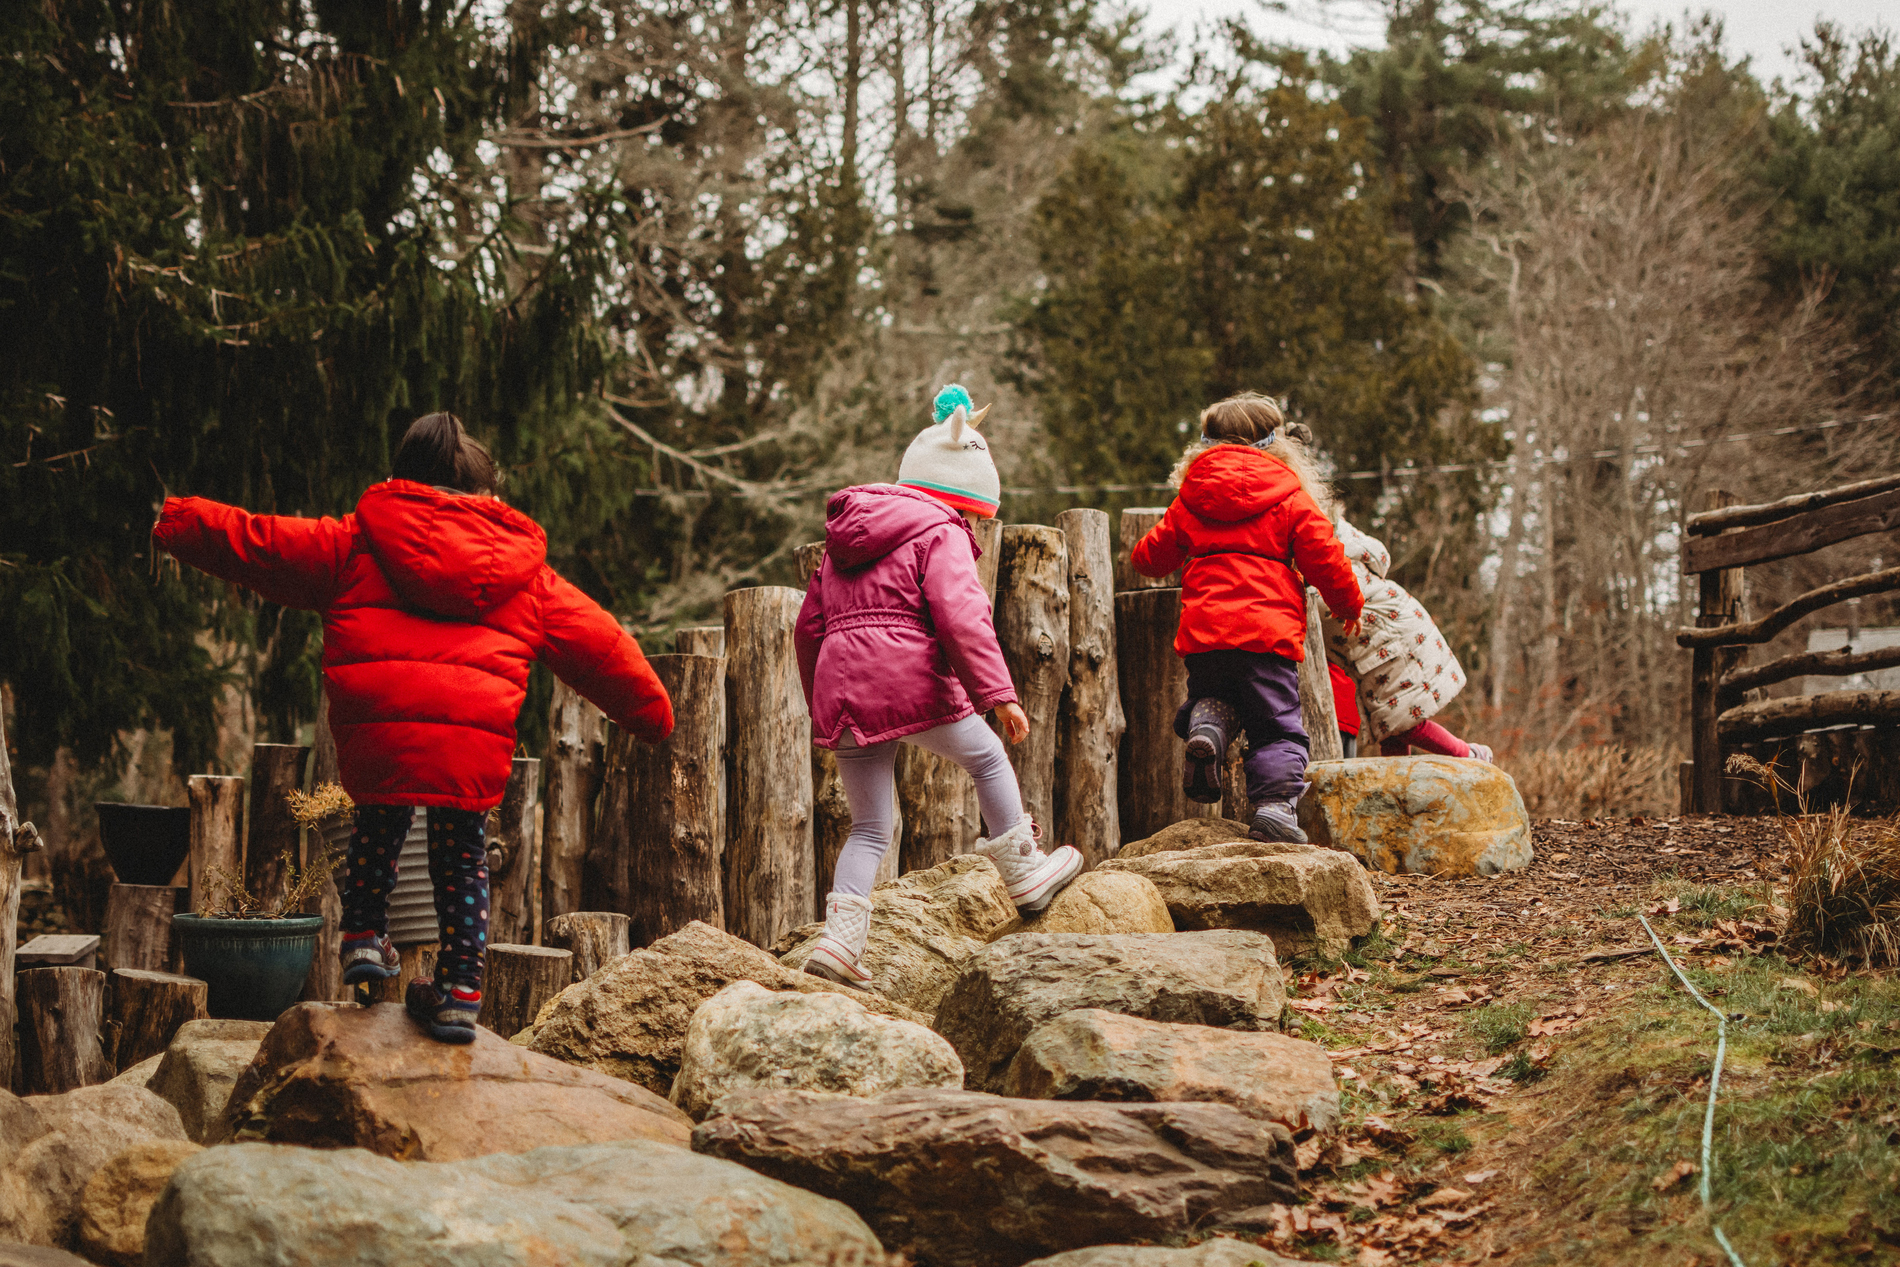 Kids in winter coats climbing rocks in a nature play area